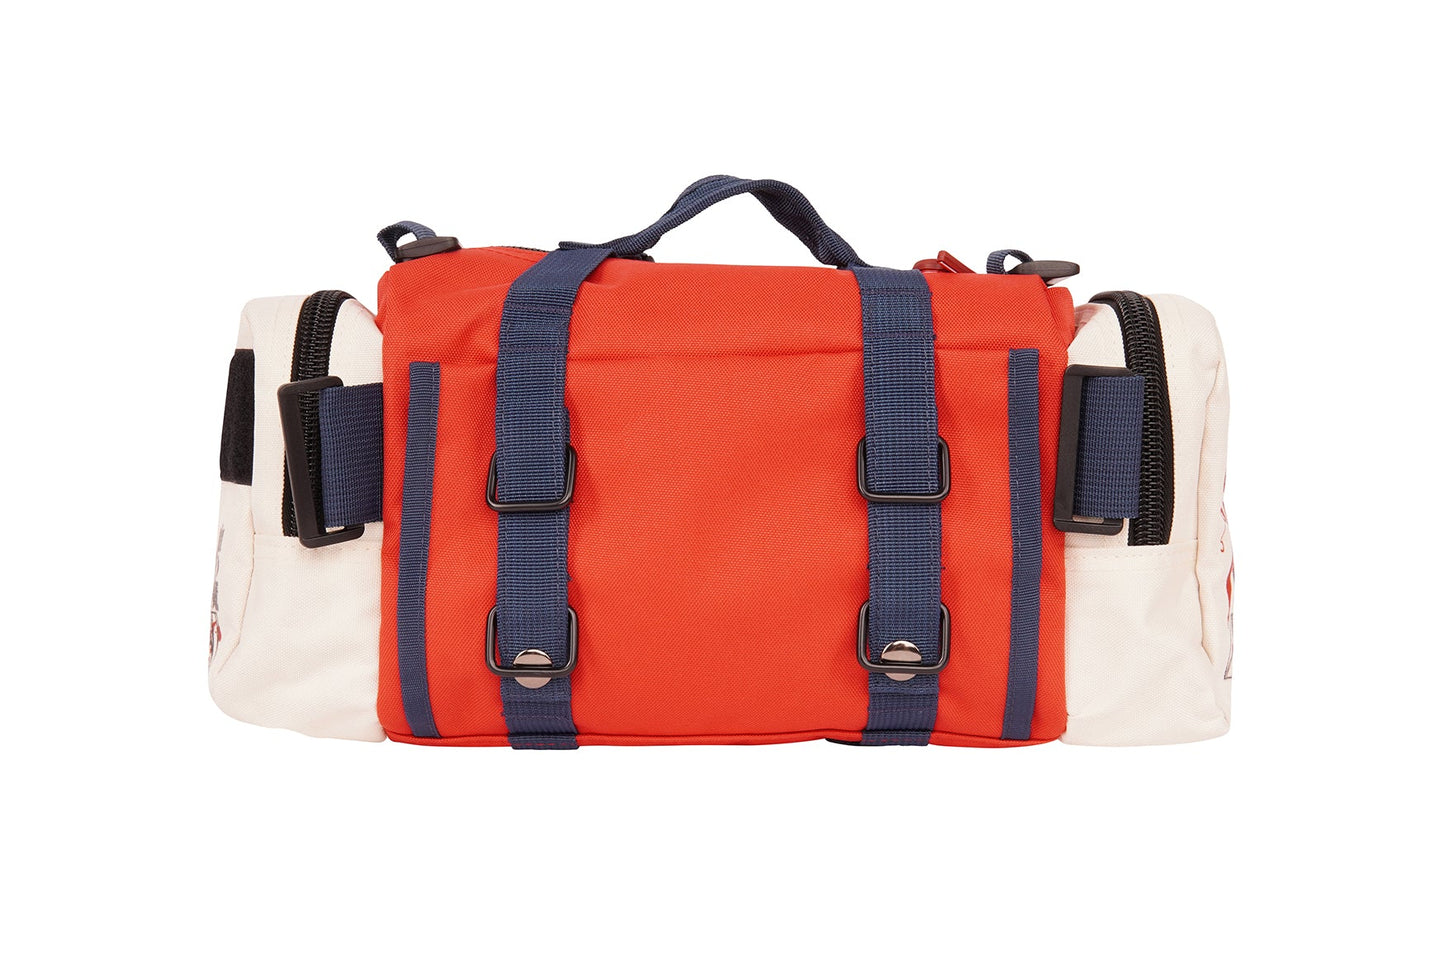 SHWA -  Classic Power Mini Duffle with Strap (Pre-Order) Patches Included